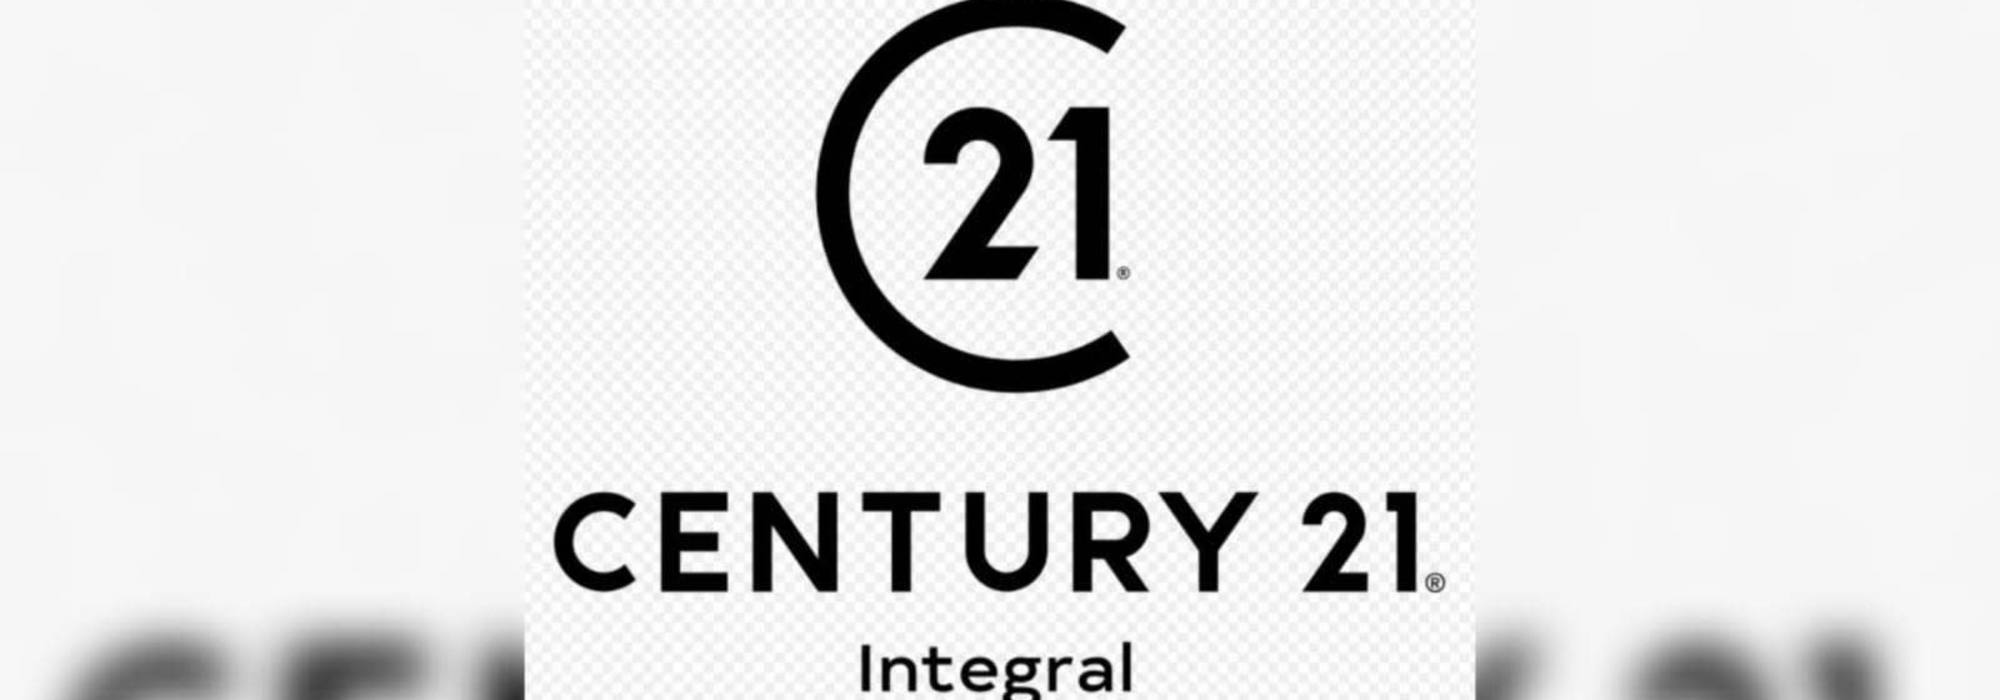 CENTURY 21 INTEGRAL  Integral Property Group S A